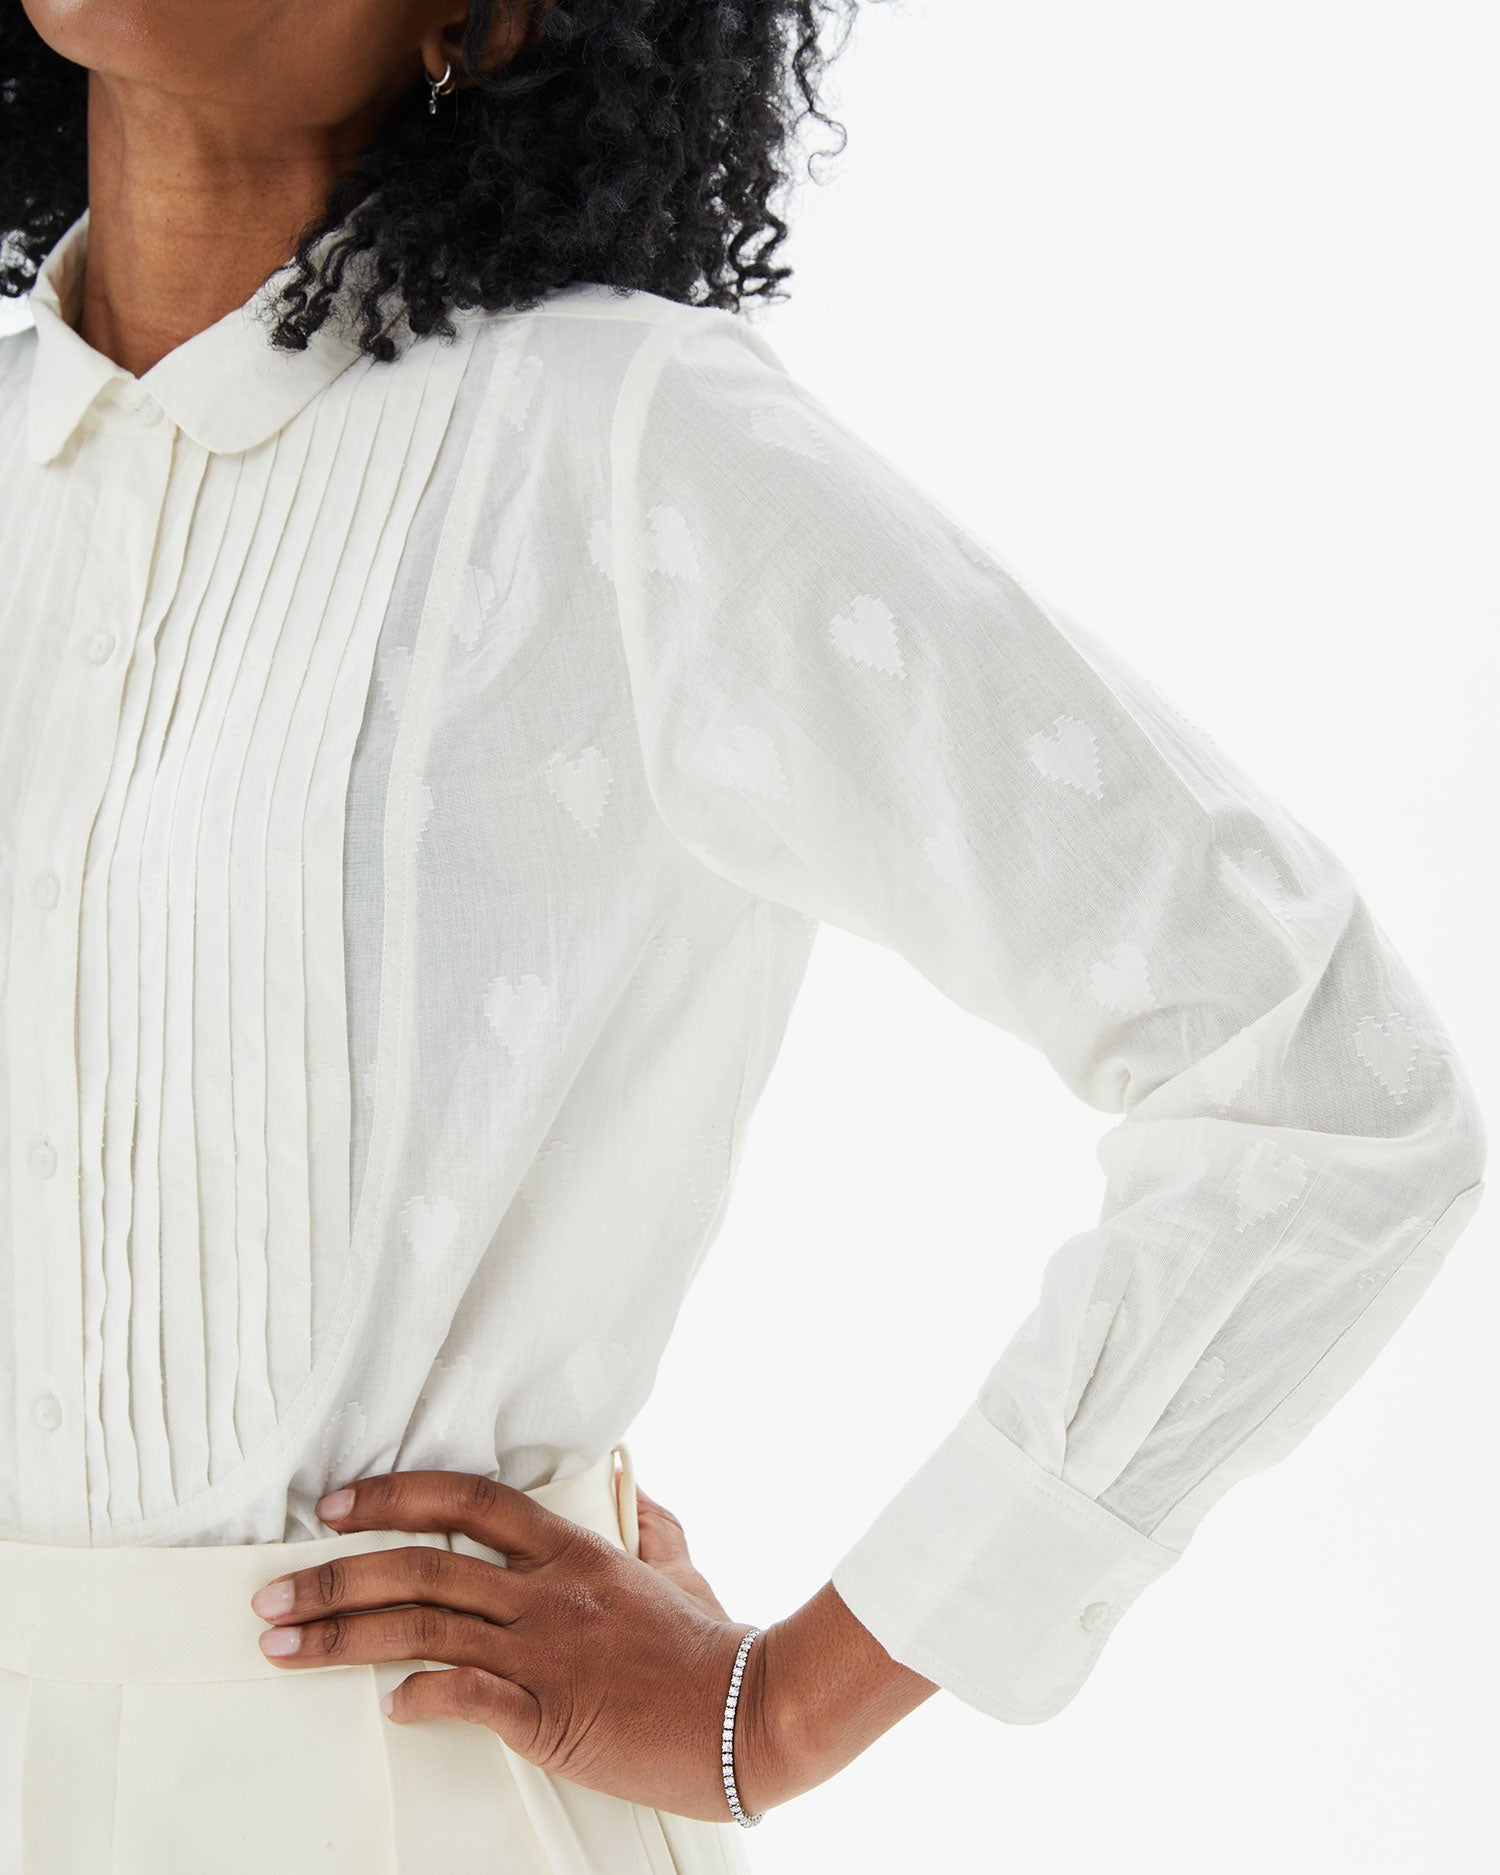 Mecca with her hand on her hips showing the details on the Cream Heart Coupé Anette Tuxedo Shirt